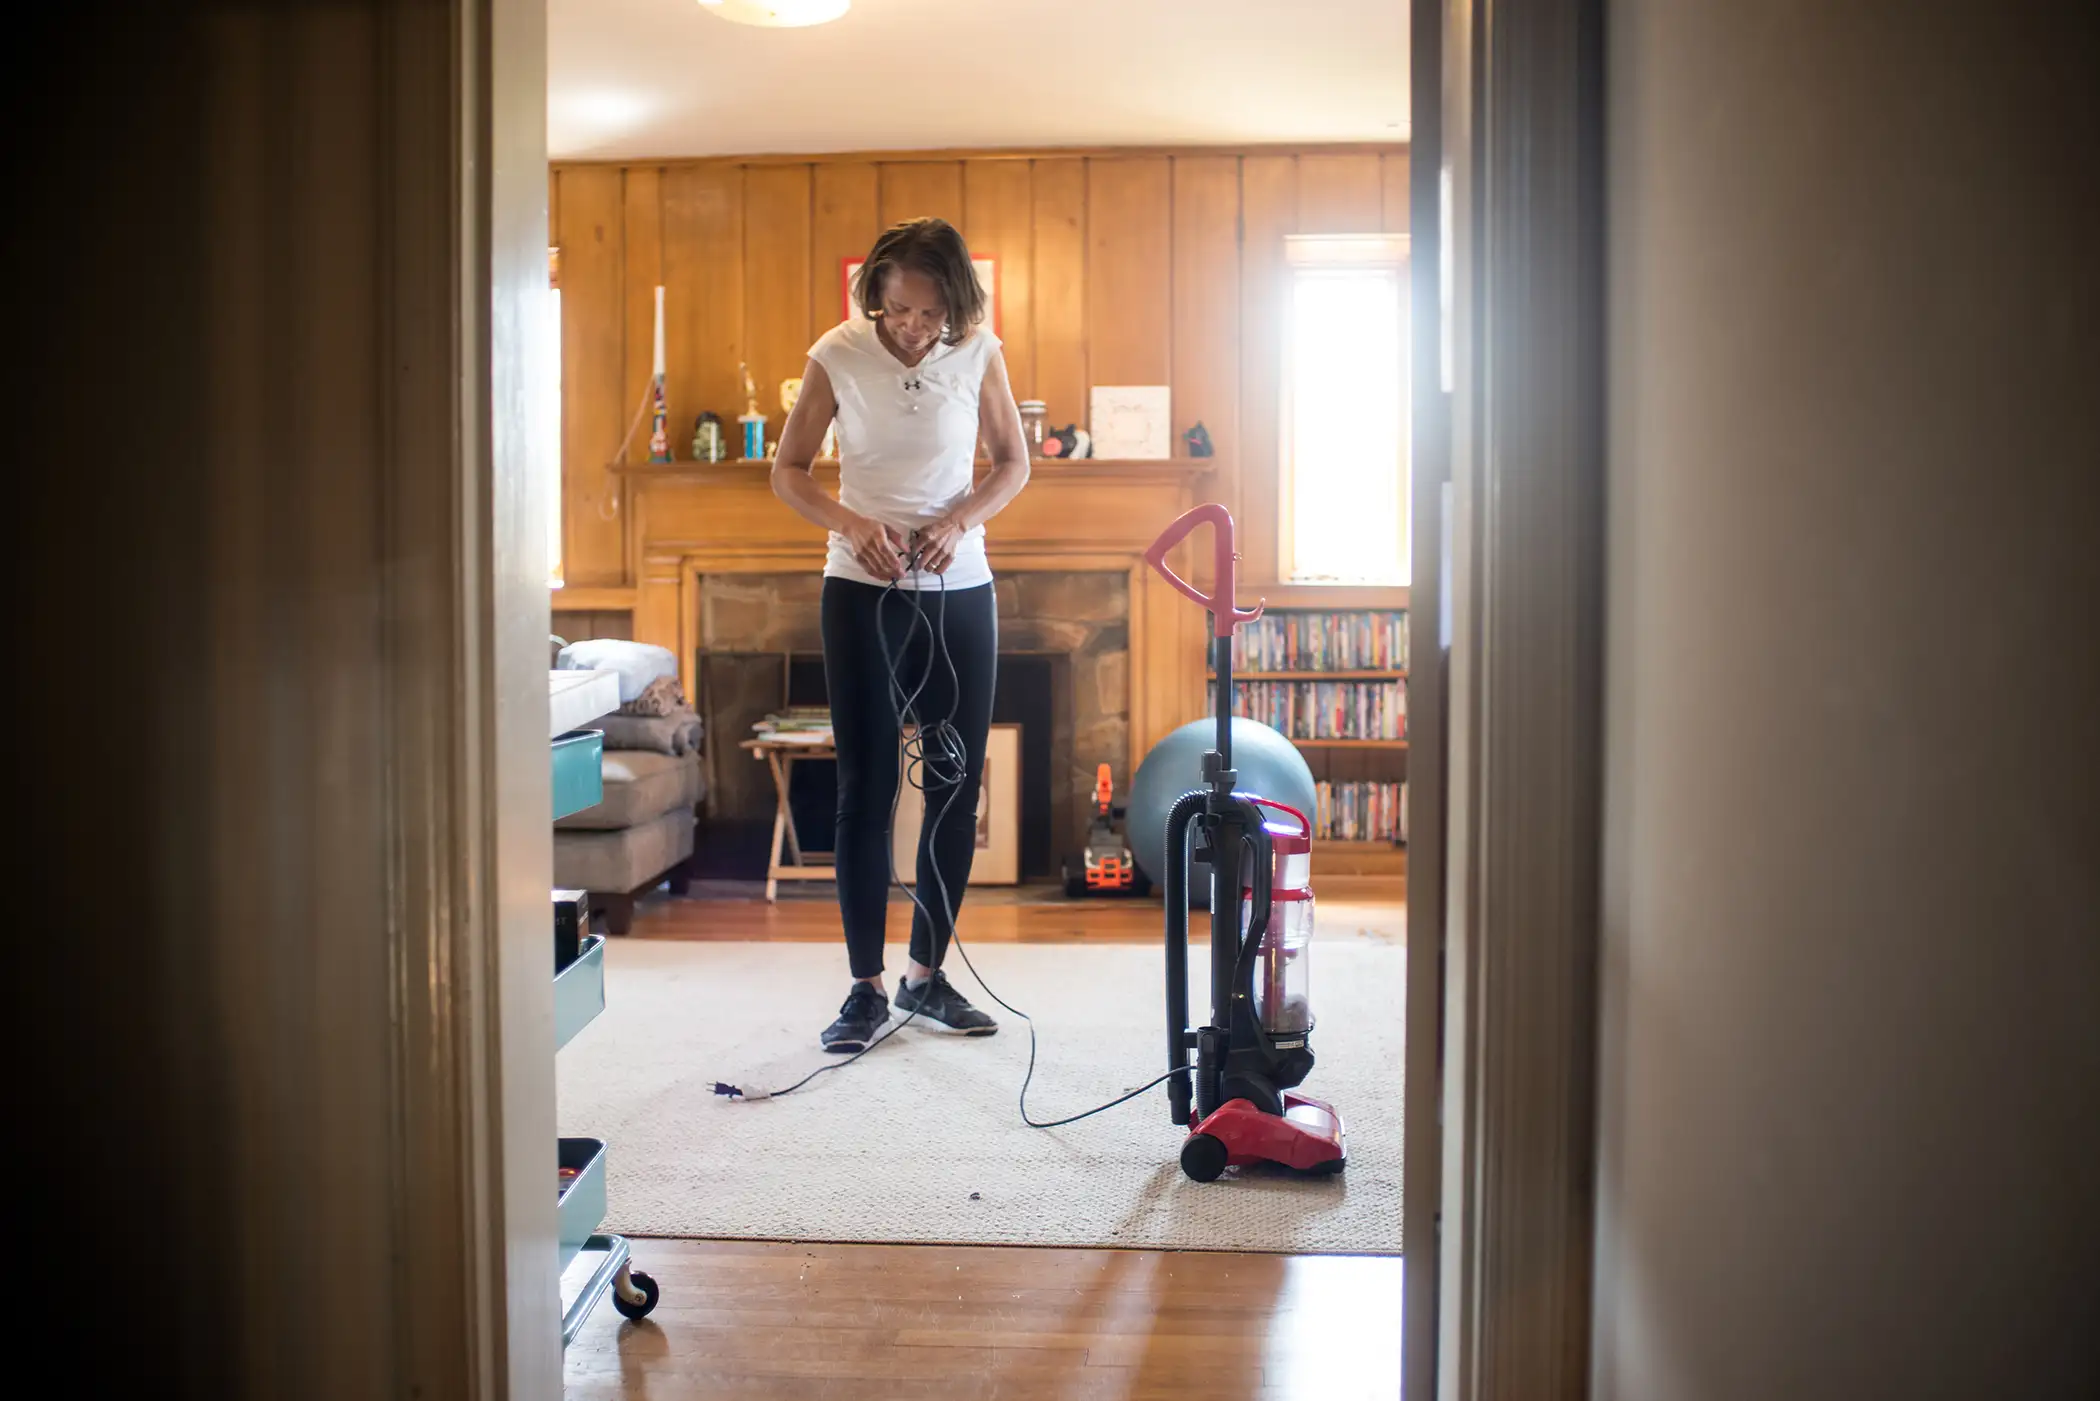 Unemployed lawyer Karen Johnson vacuums her family room while her family is at work and school, April 14, 2017.